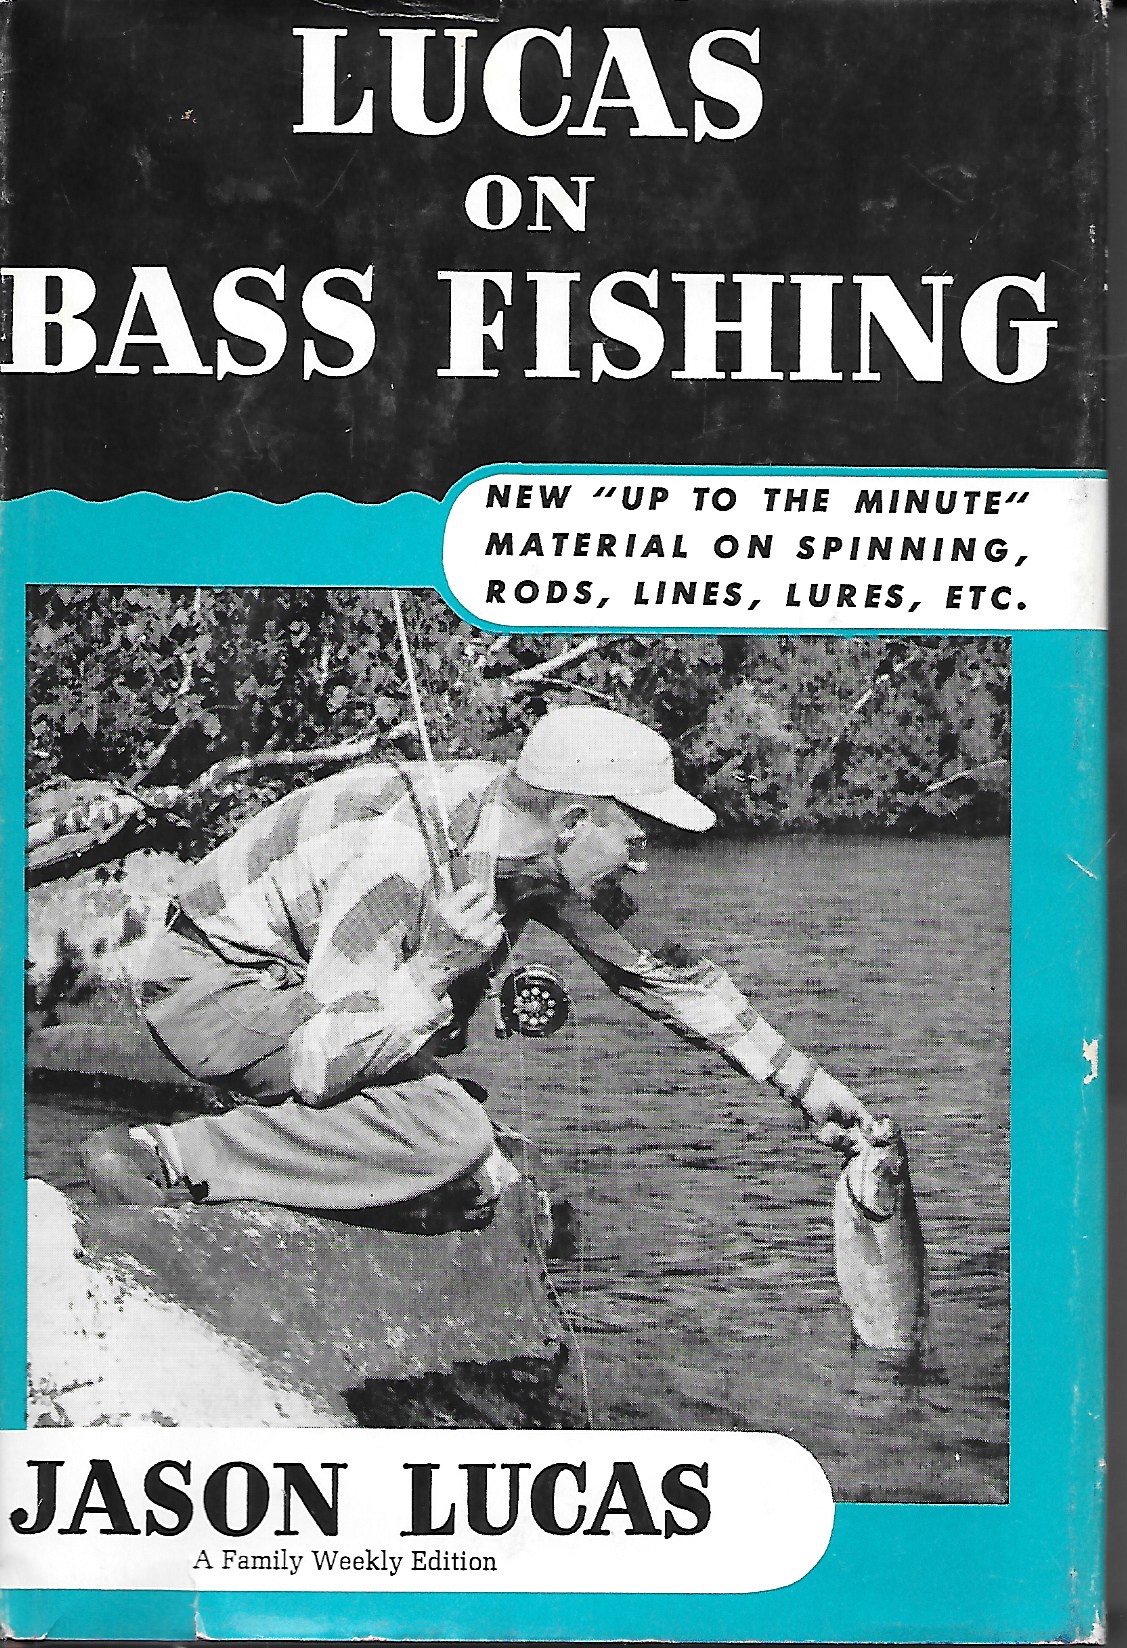 Lucas on Bass Fishing (Revised Edition) by Jason Lucas - Hardcover - Book  Club Edition - 1962 - from Walnut Valley Books/Books by White (SKU: 010834)